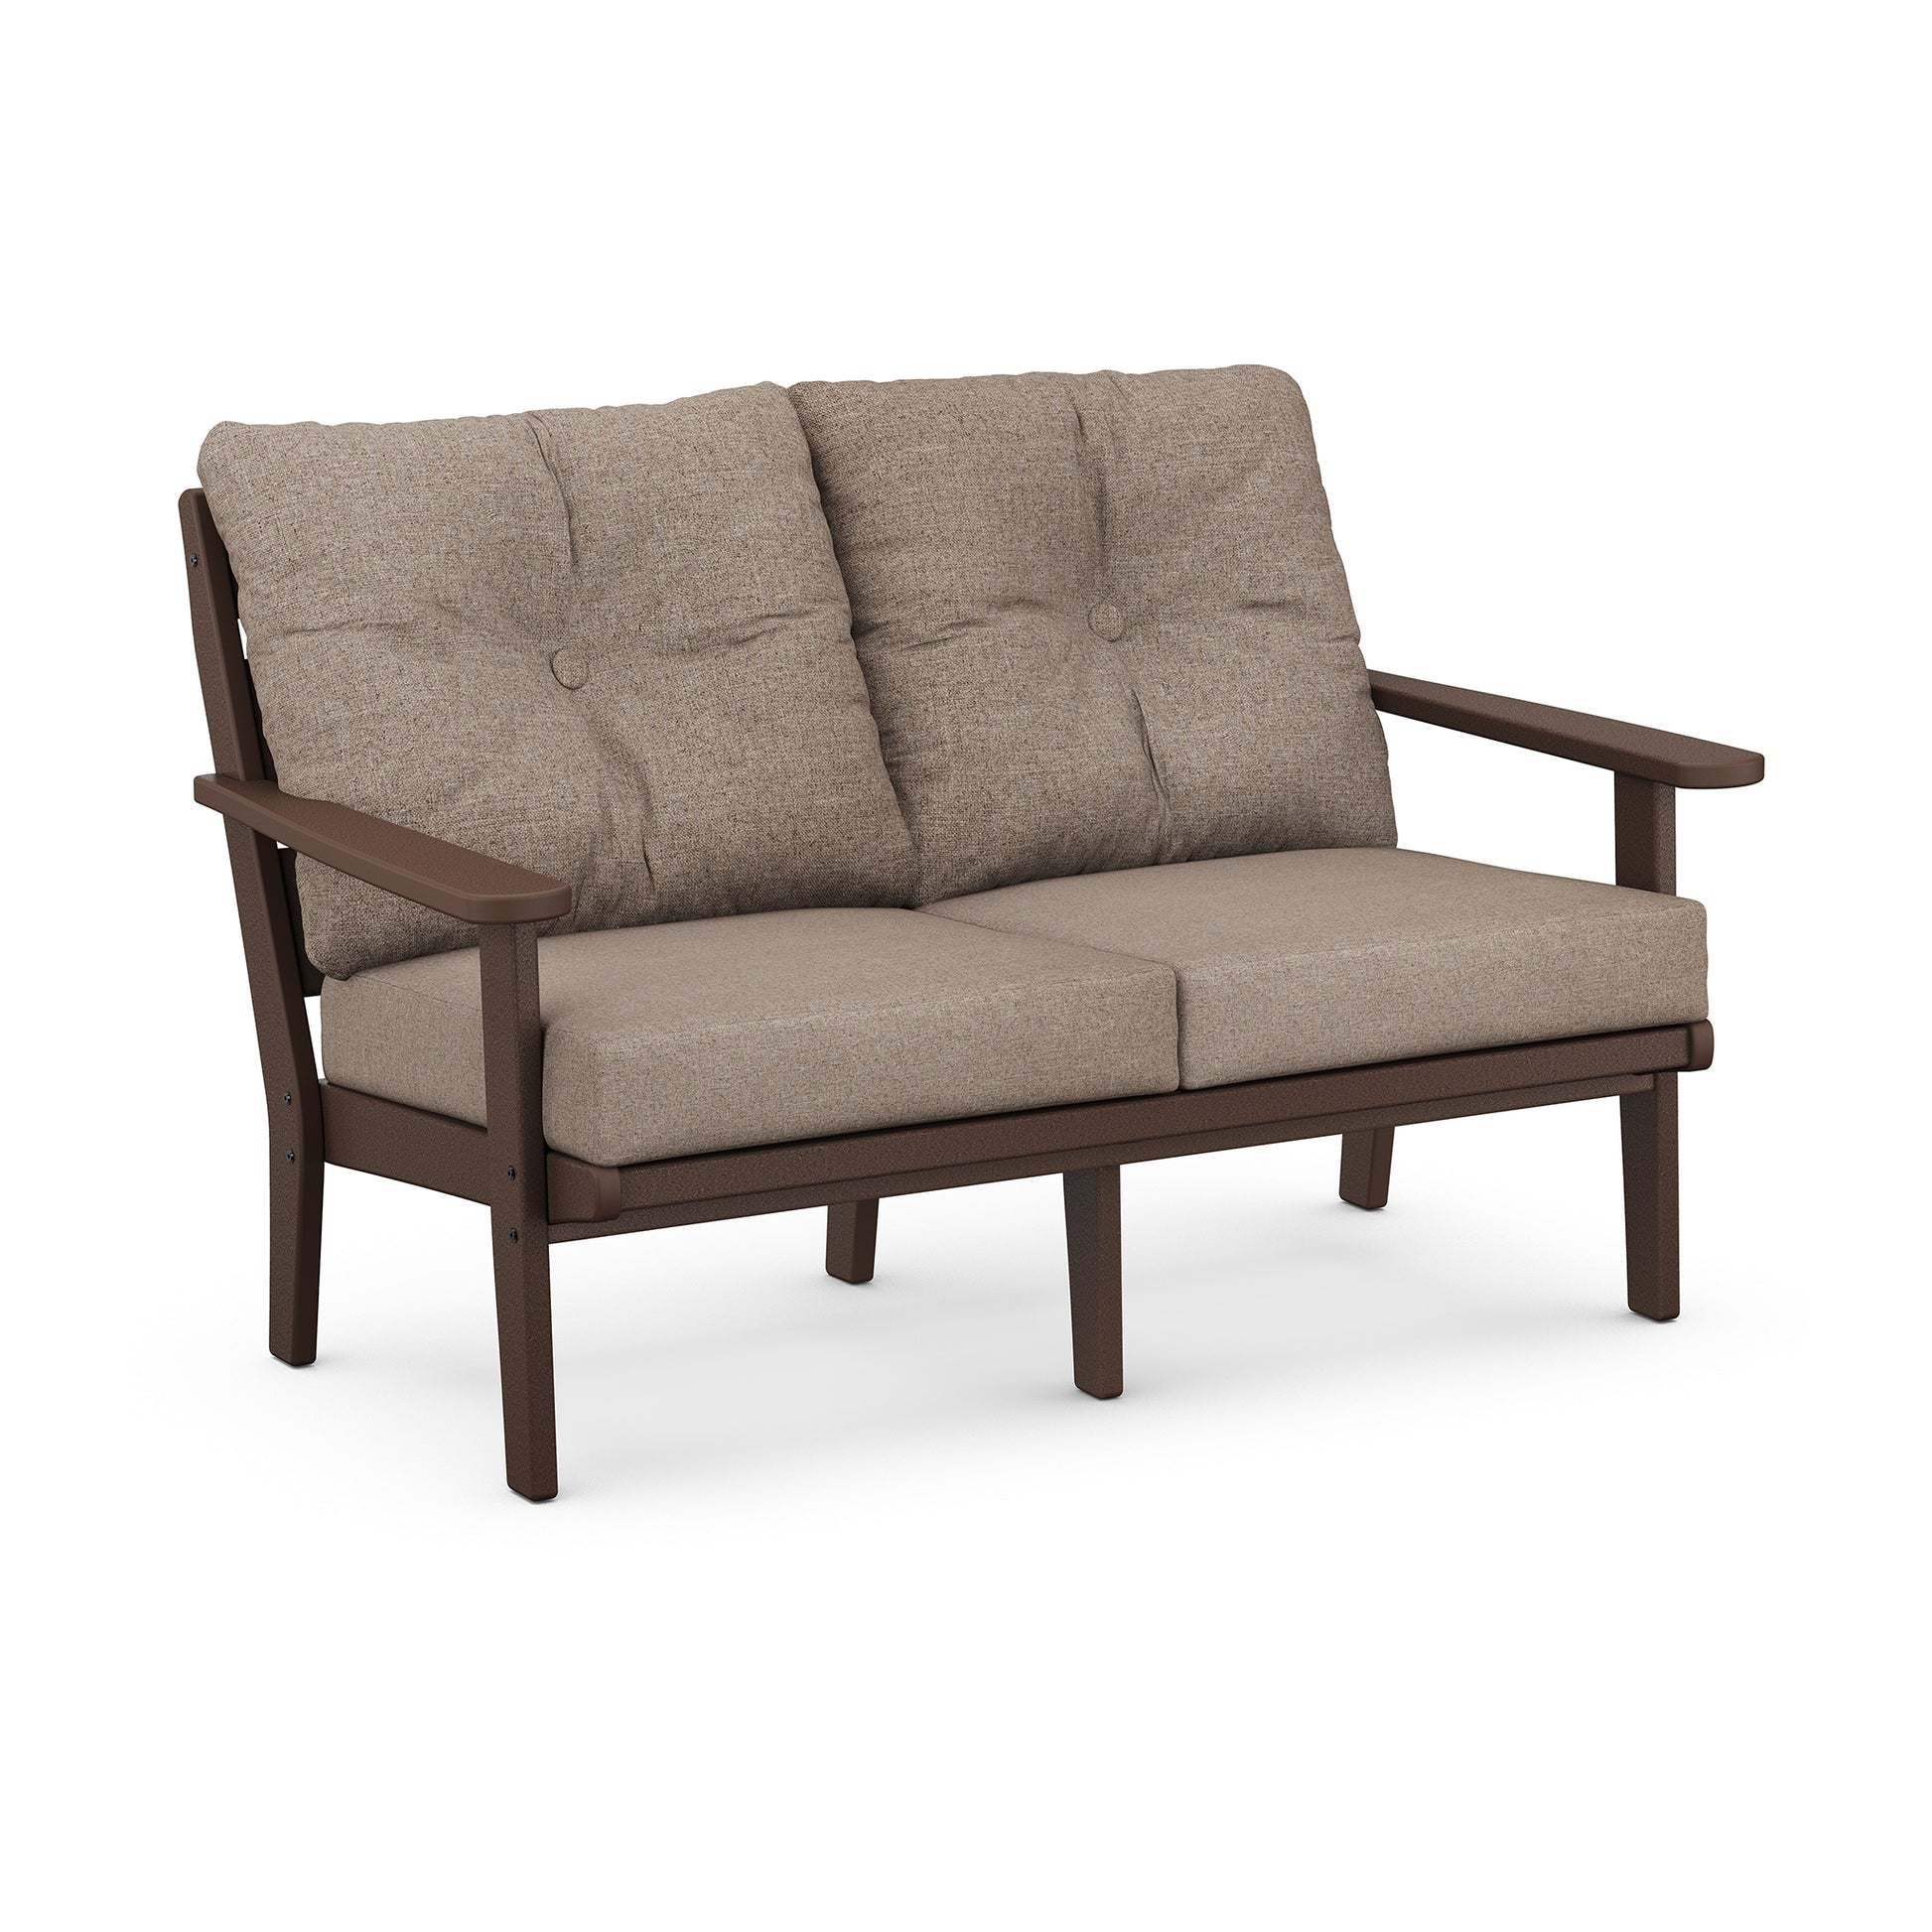 A modern all-weather outdoor loveseat with a brown wooden frame and light brown cushions, isolated on a white background- POLYWOOD Lakeside Deep Seating Loveseat by POLYWOOD.